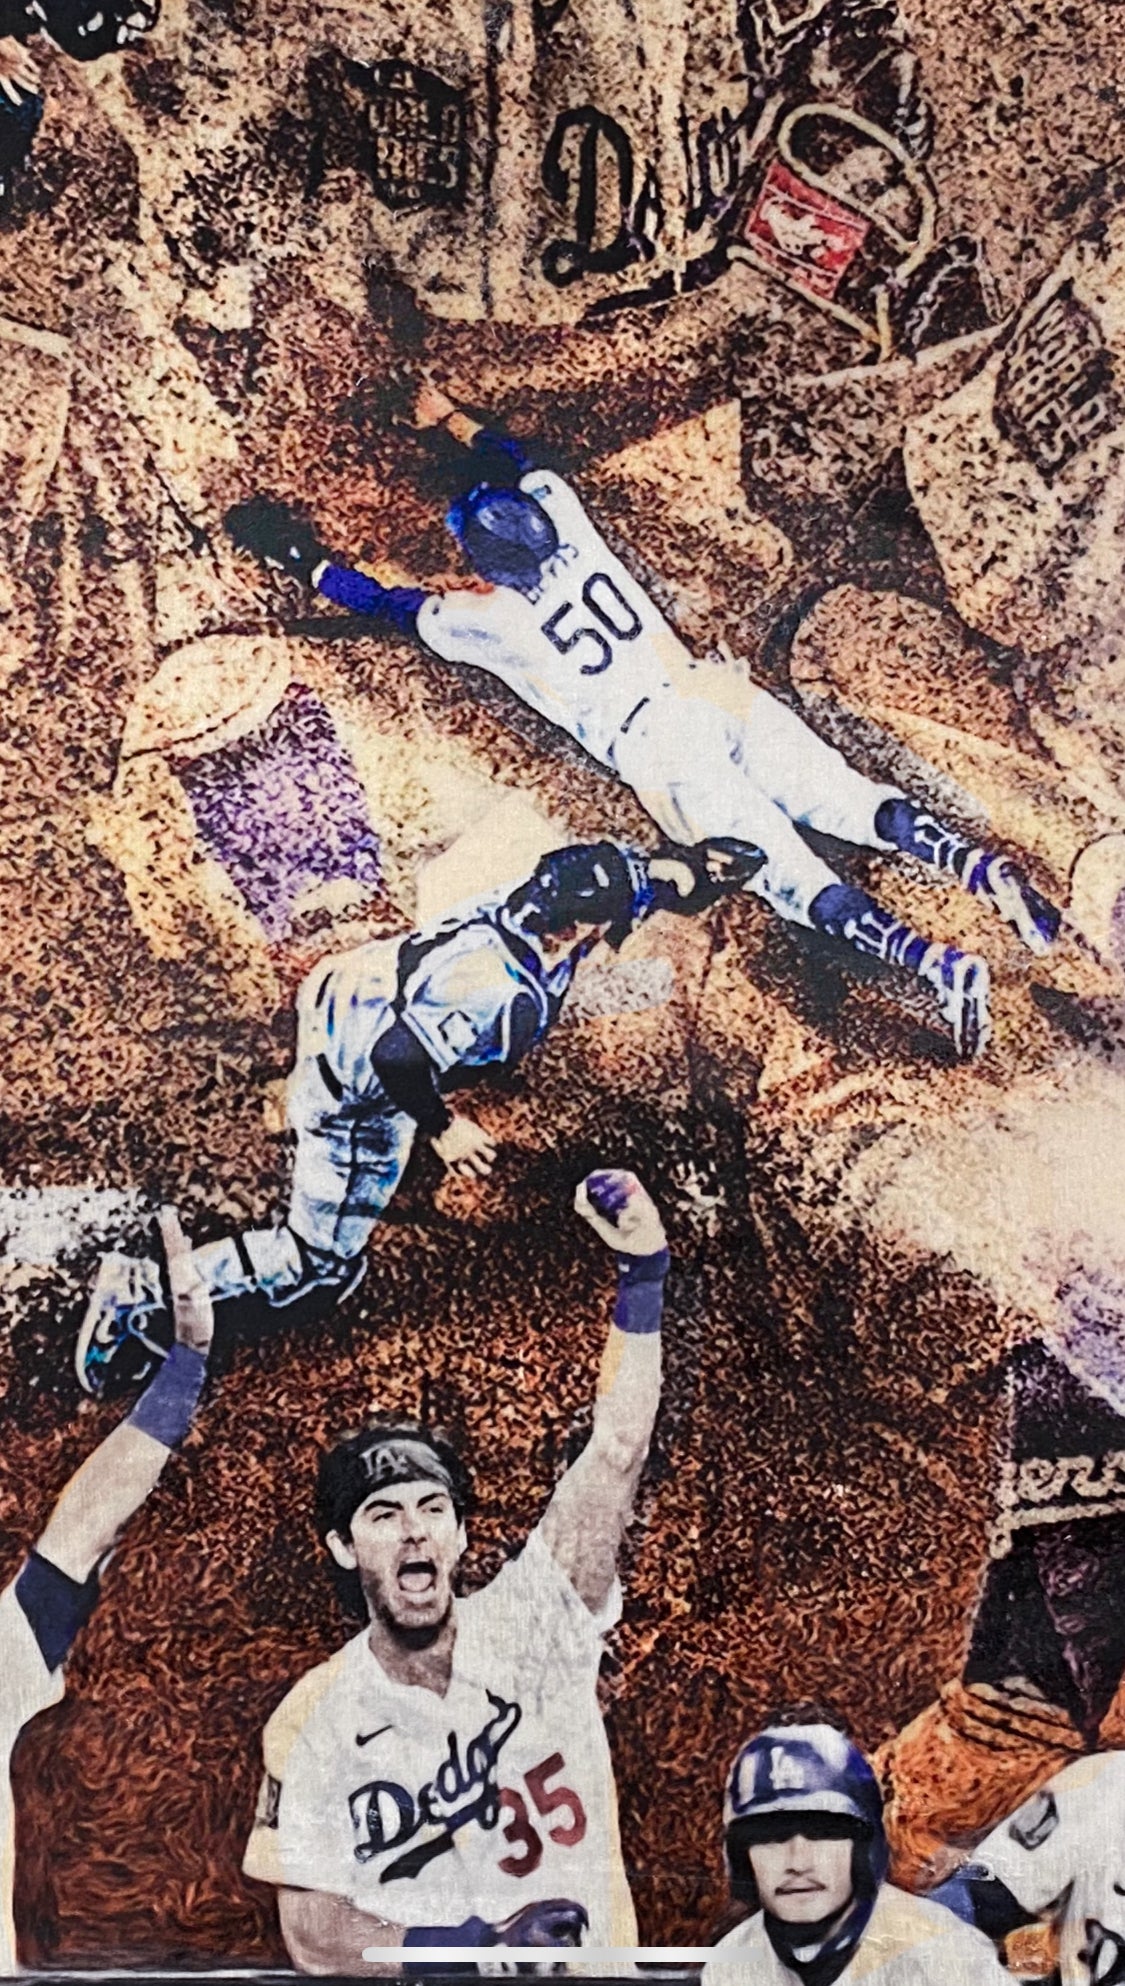 "Play at the Plate" (World Series Commemorative Piece Part II) Los Angeles Dodgers - 1/1 Original on Wood